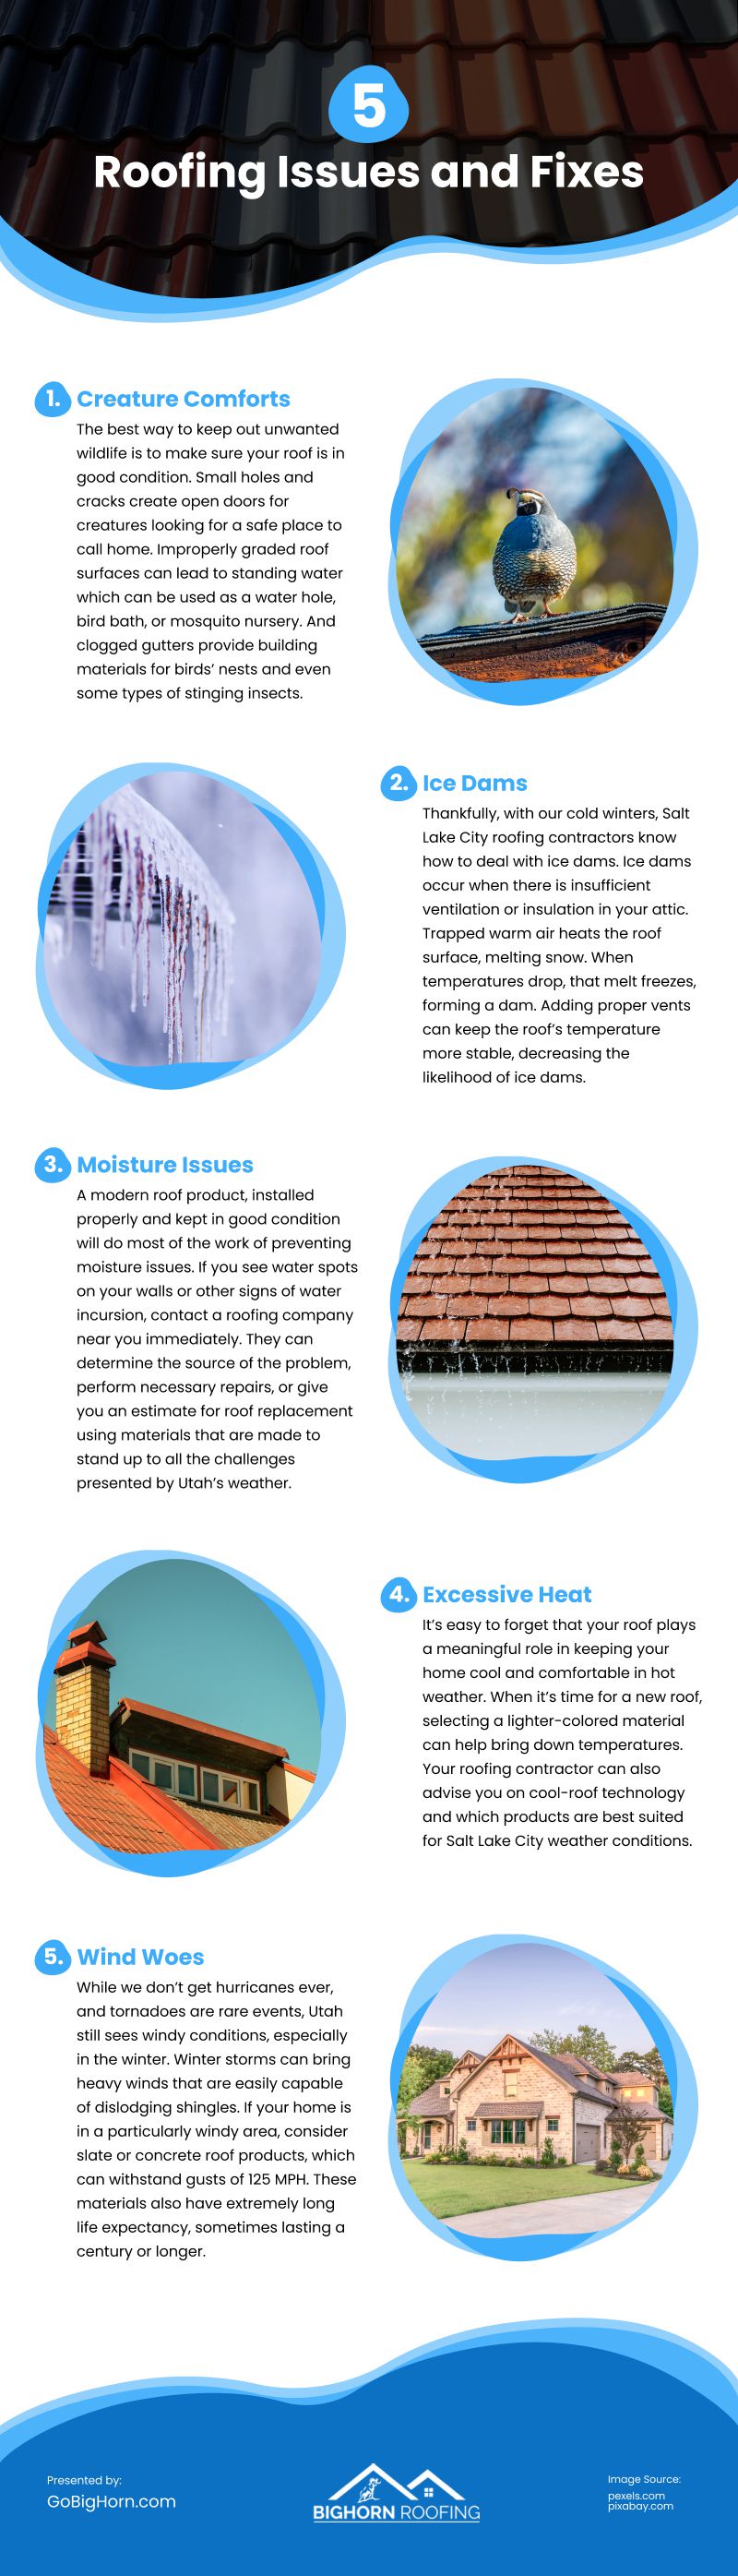 5 Roofing Issues and Fixes Infographic